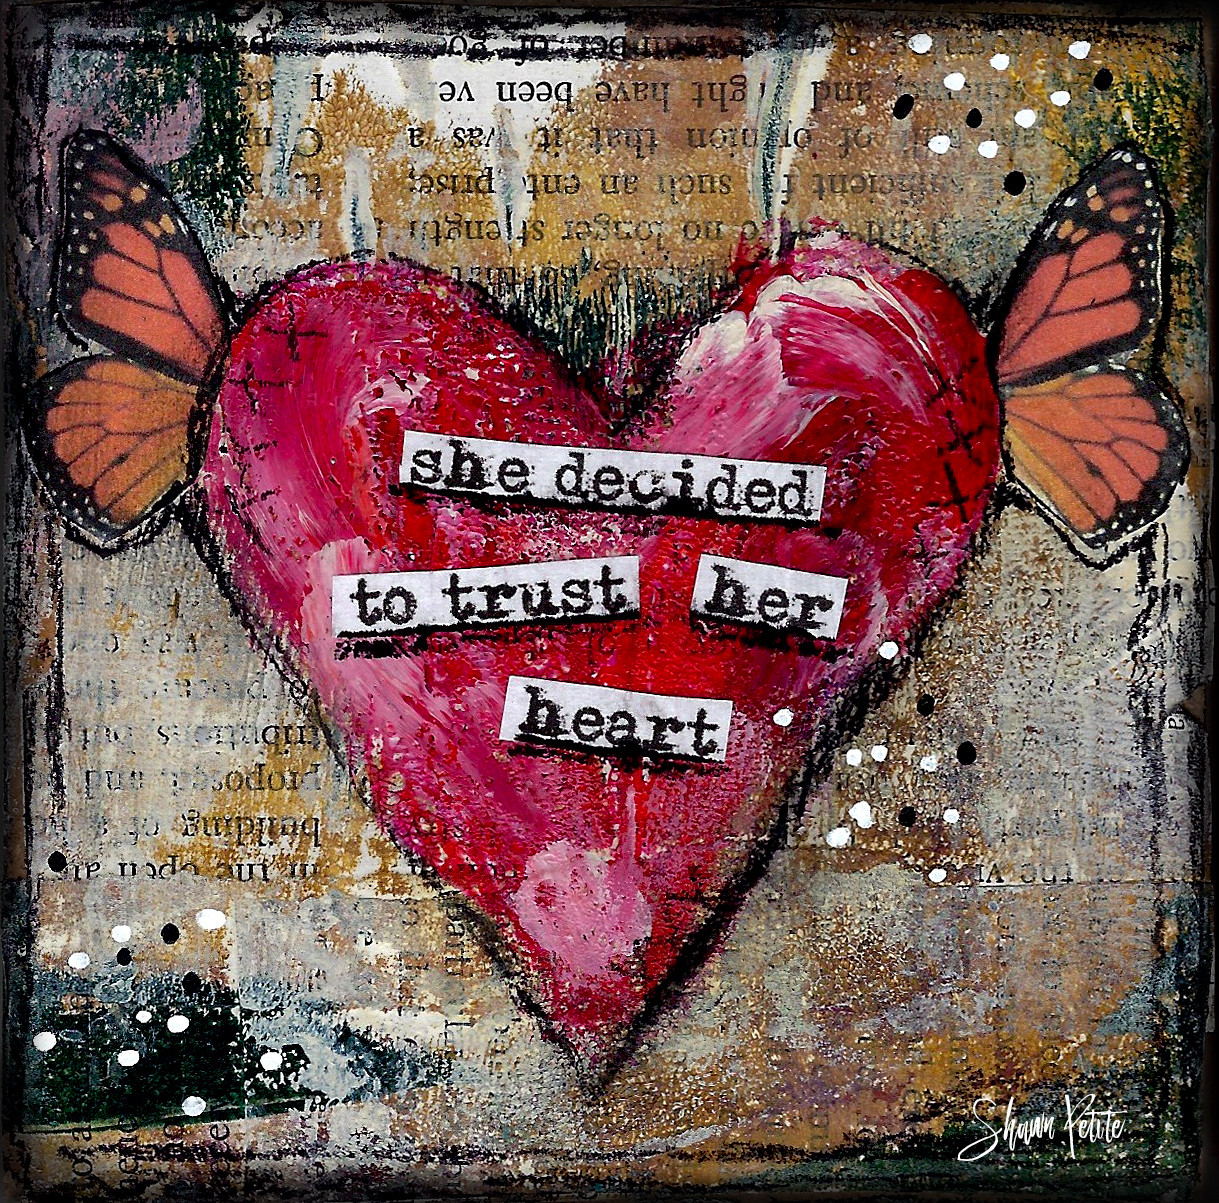 Giving hearts "She decided to trust her Heart" 4x4 print on wood